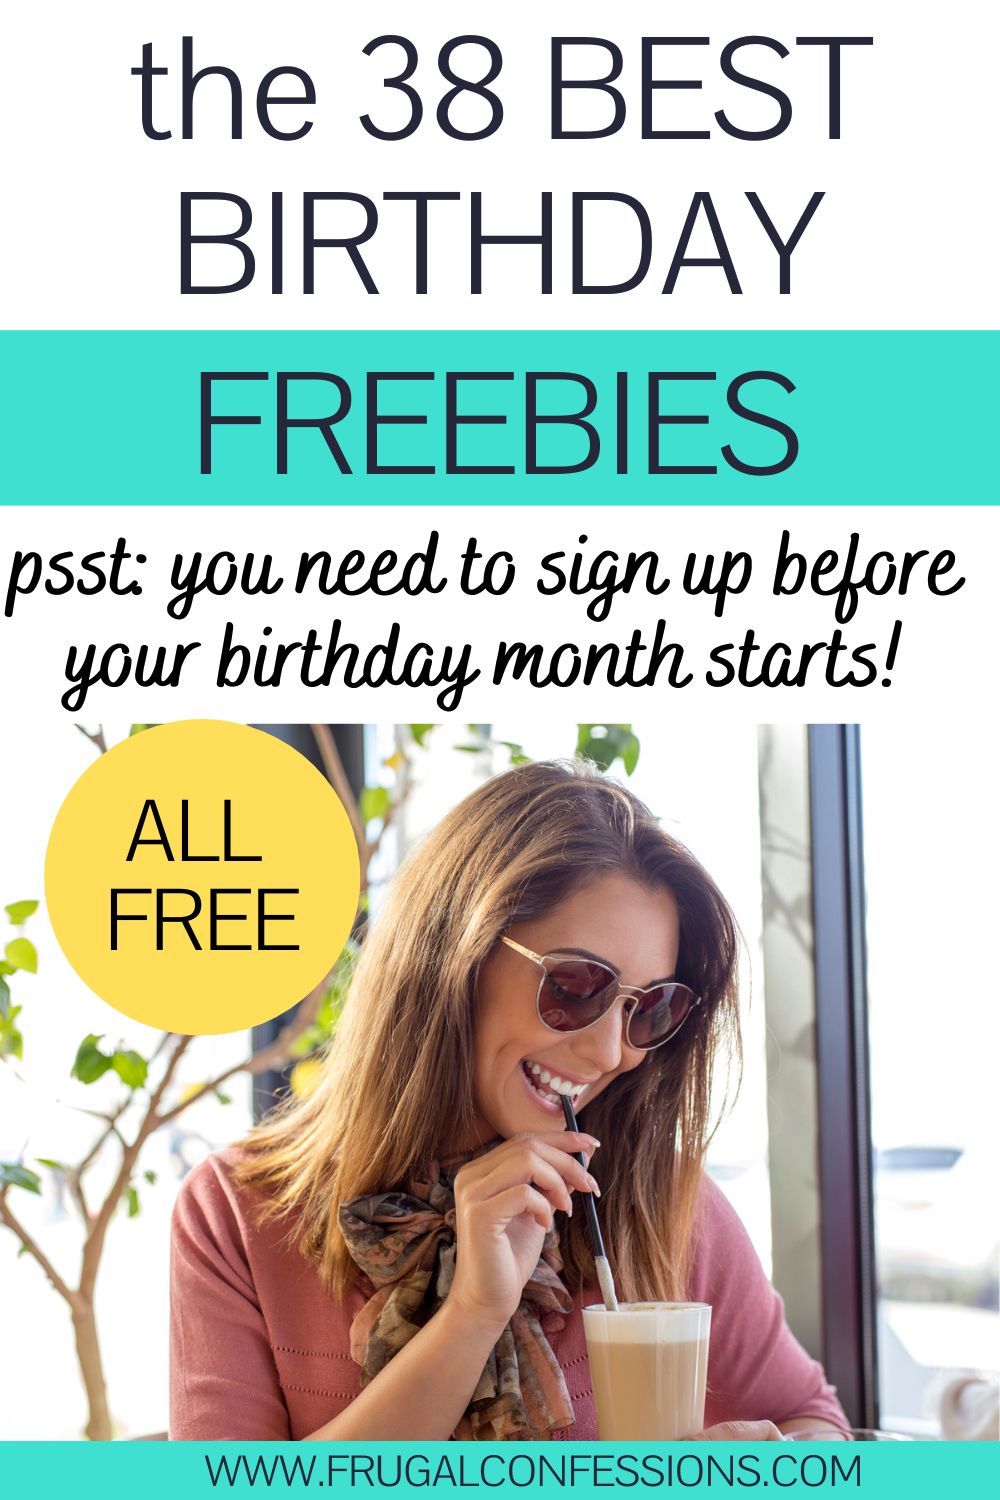 woman in sunglasses smiling sipping iced latte, text overlay "the 38 best birthday freebies"